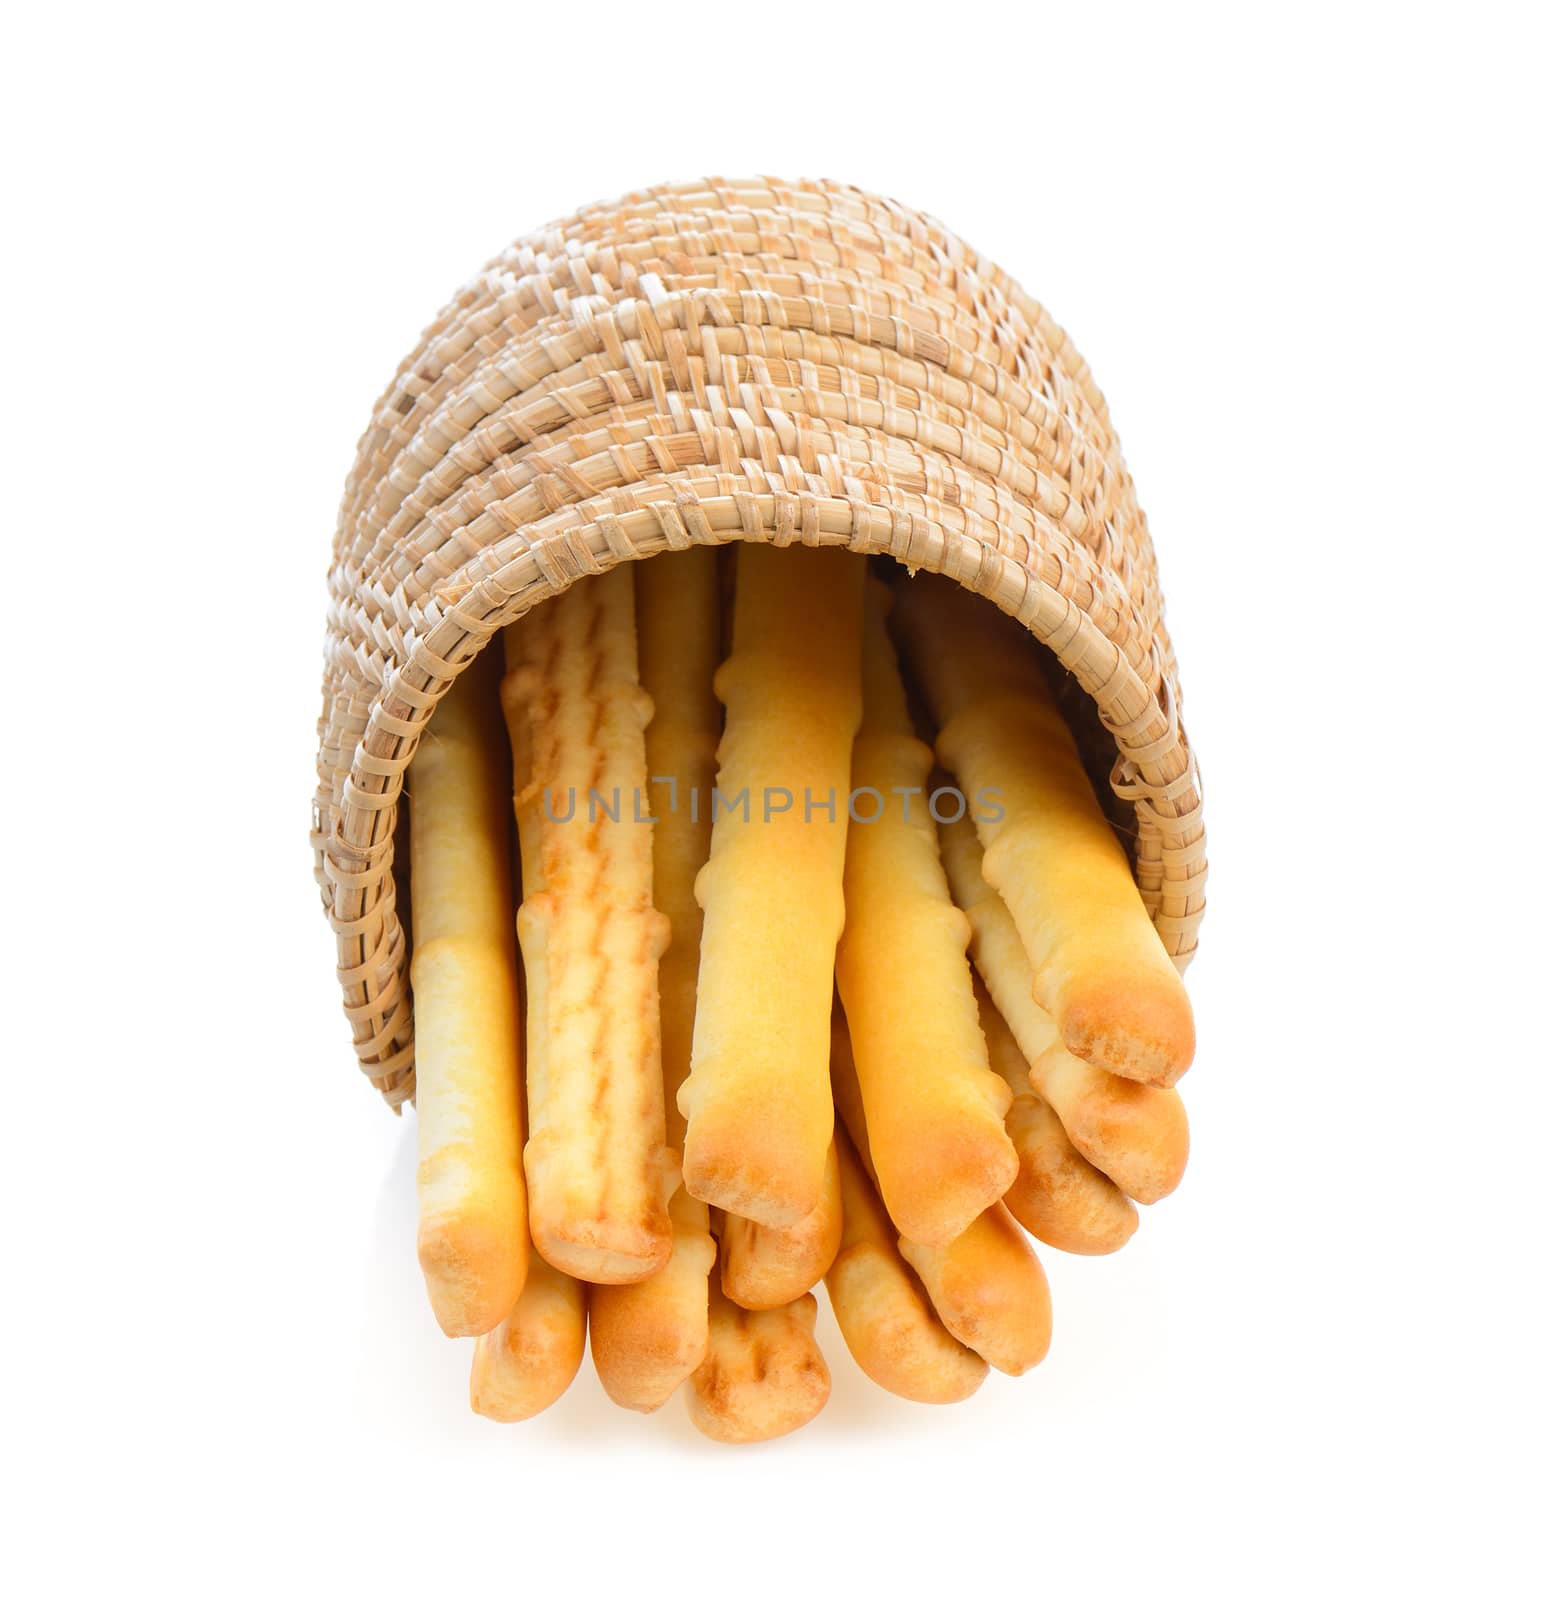 bread sticks in basket isolated on white background by sommai